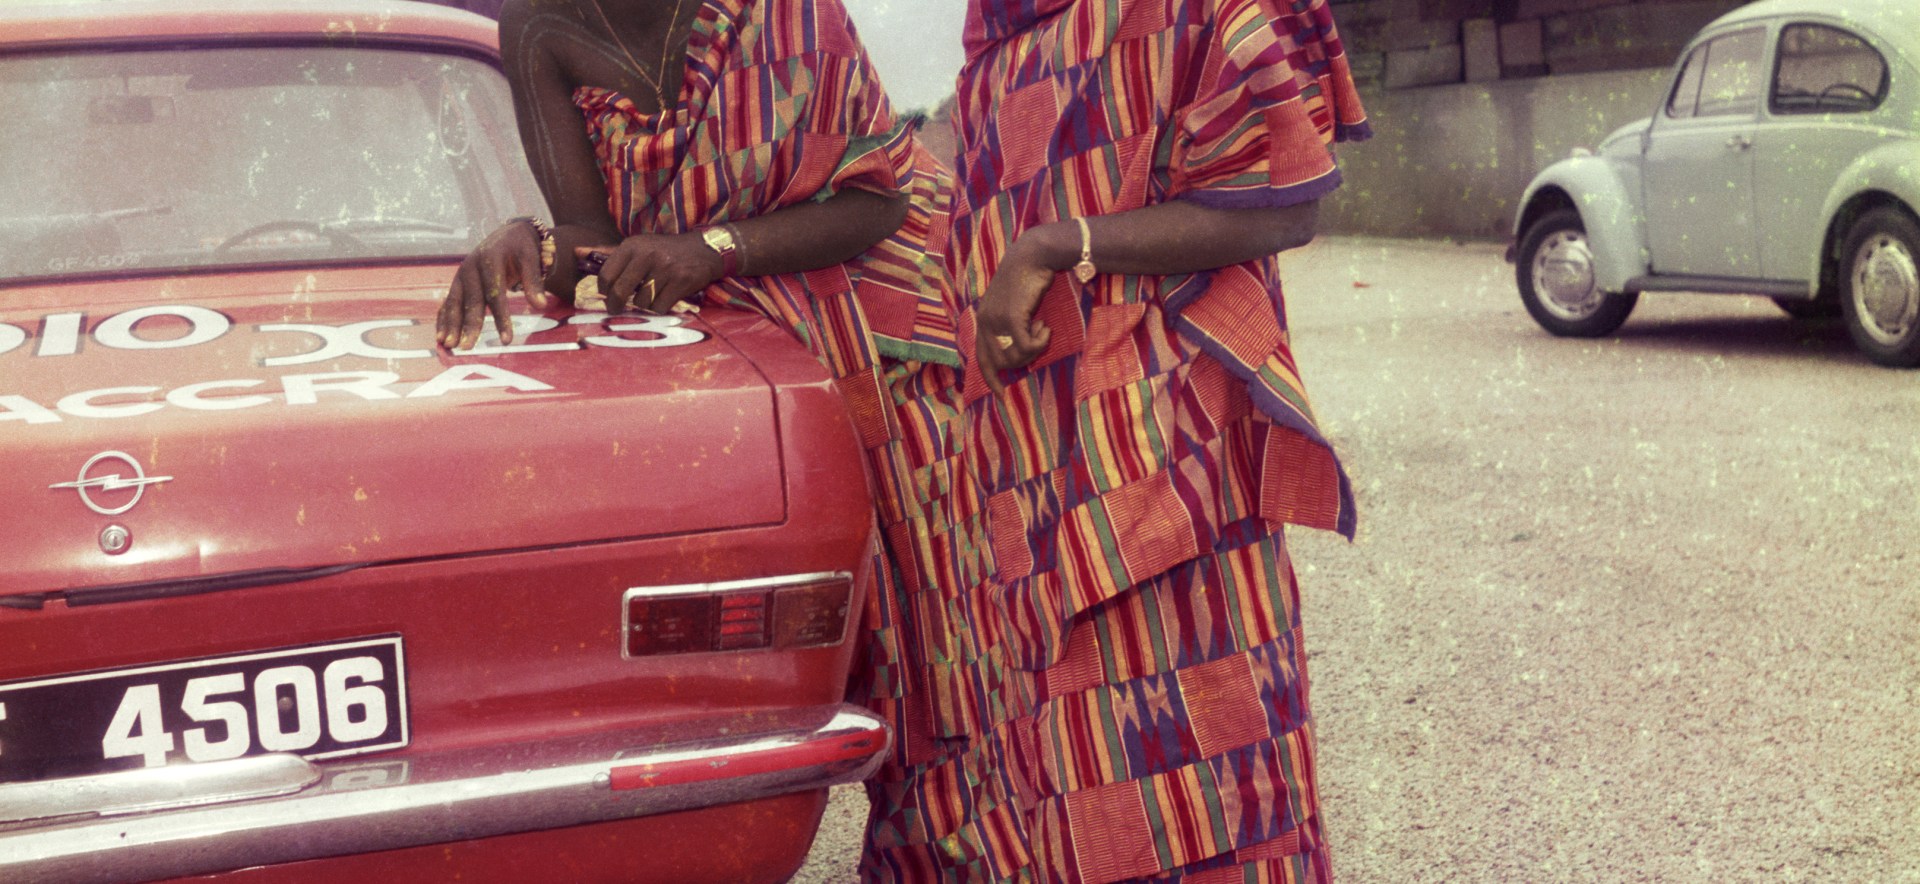 Two women dressed for a church celebration stand next to a red car